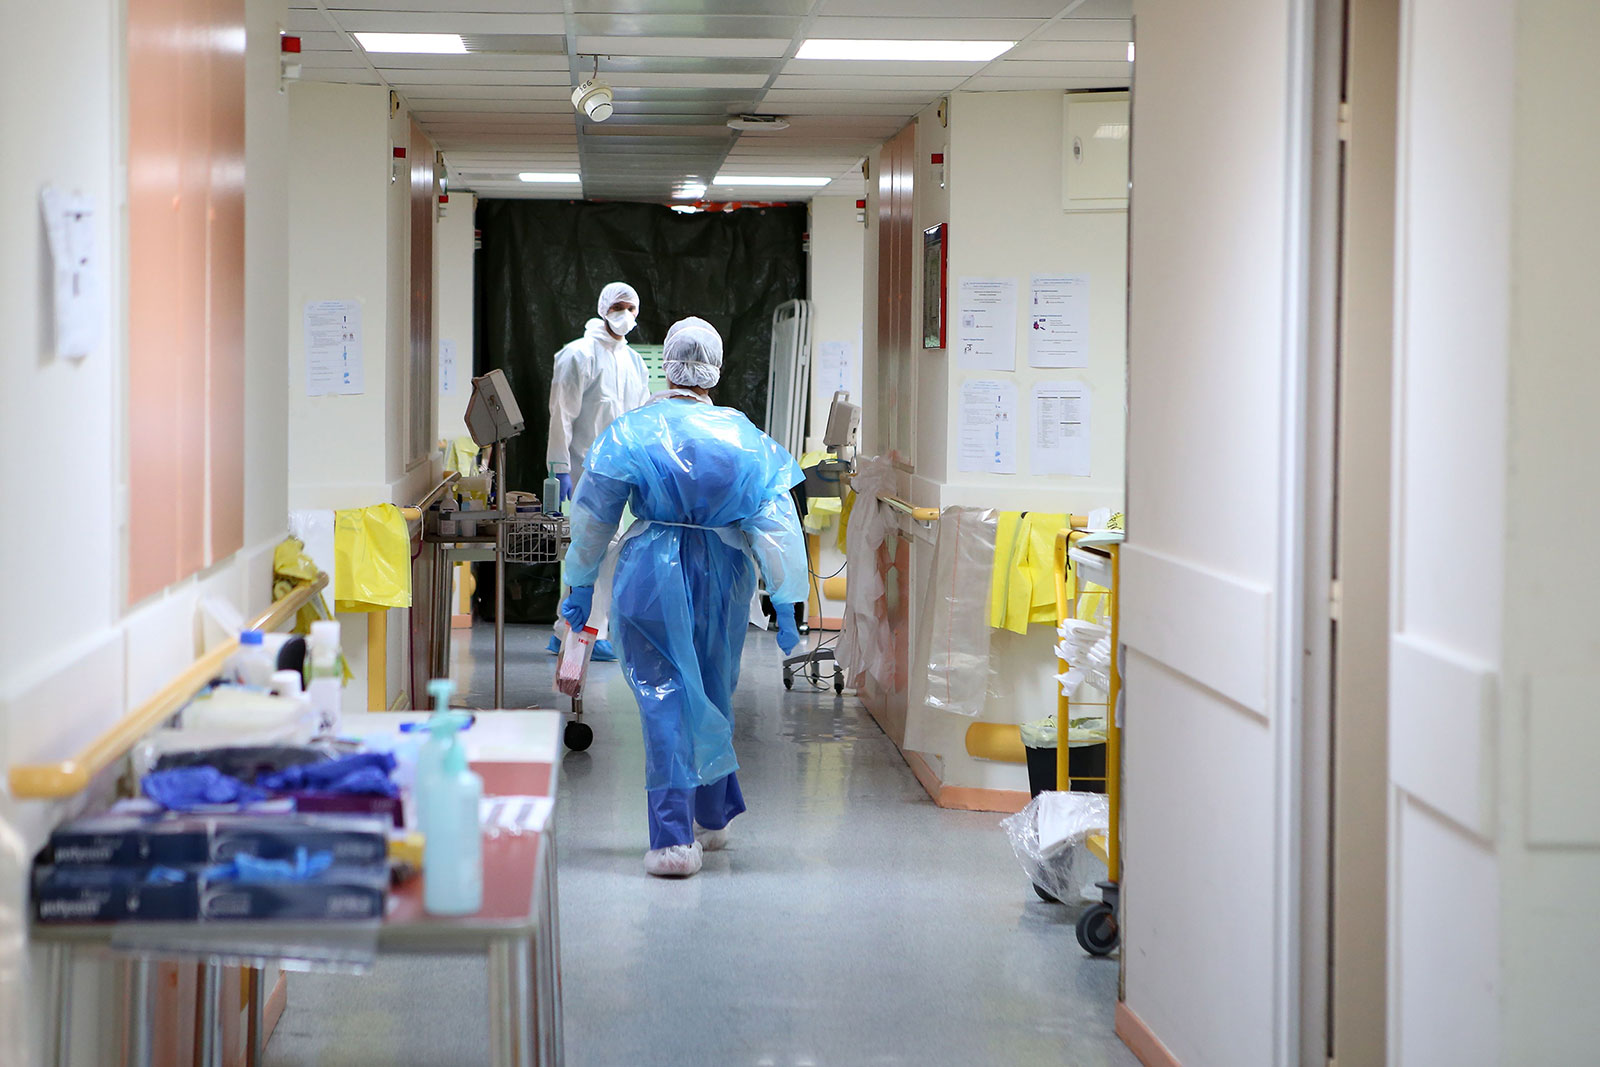 Nurses wearing protective gear walk in a hallway at a hospital in Ajaccio, France, on April 23.